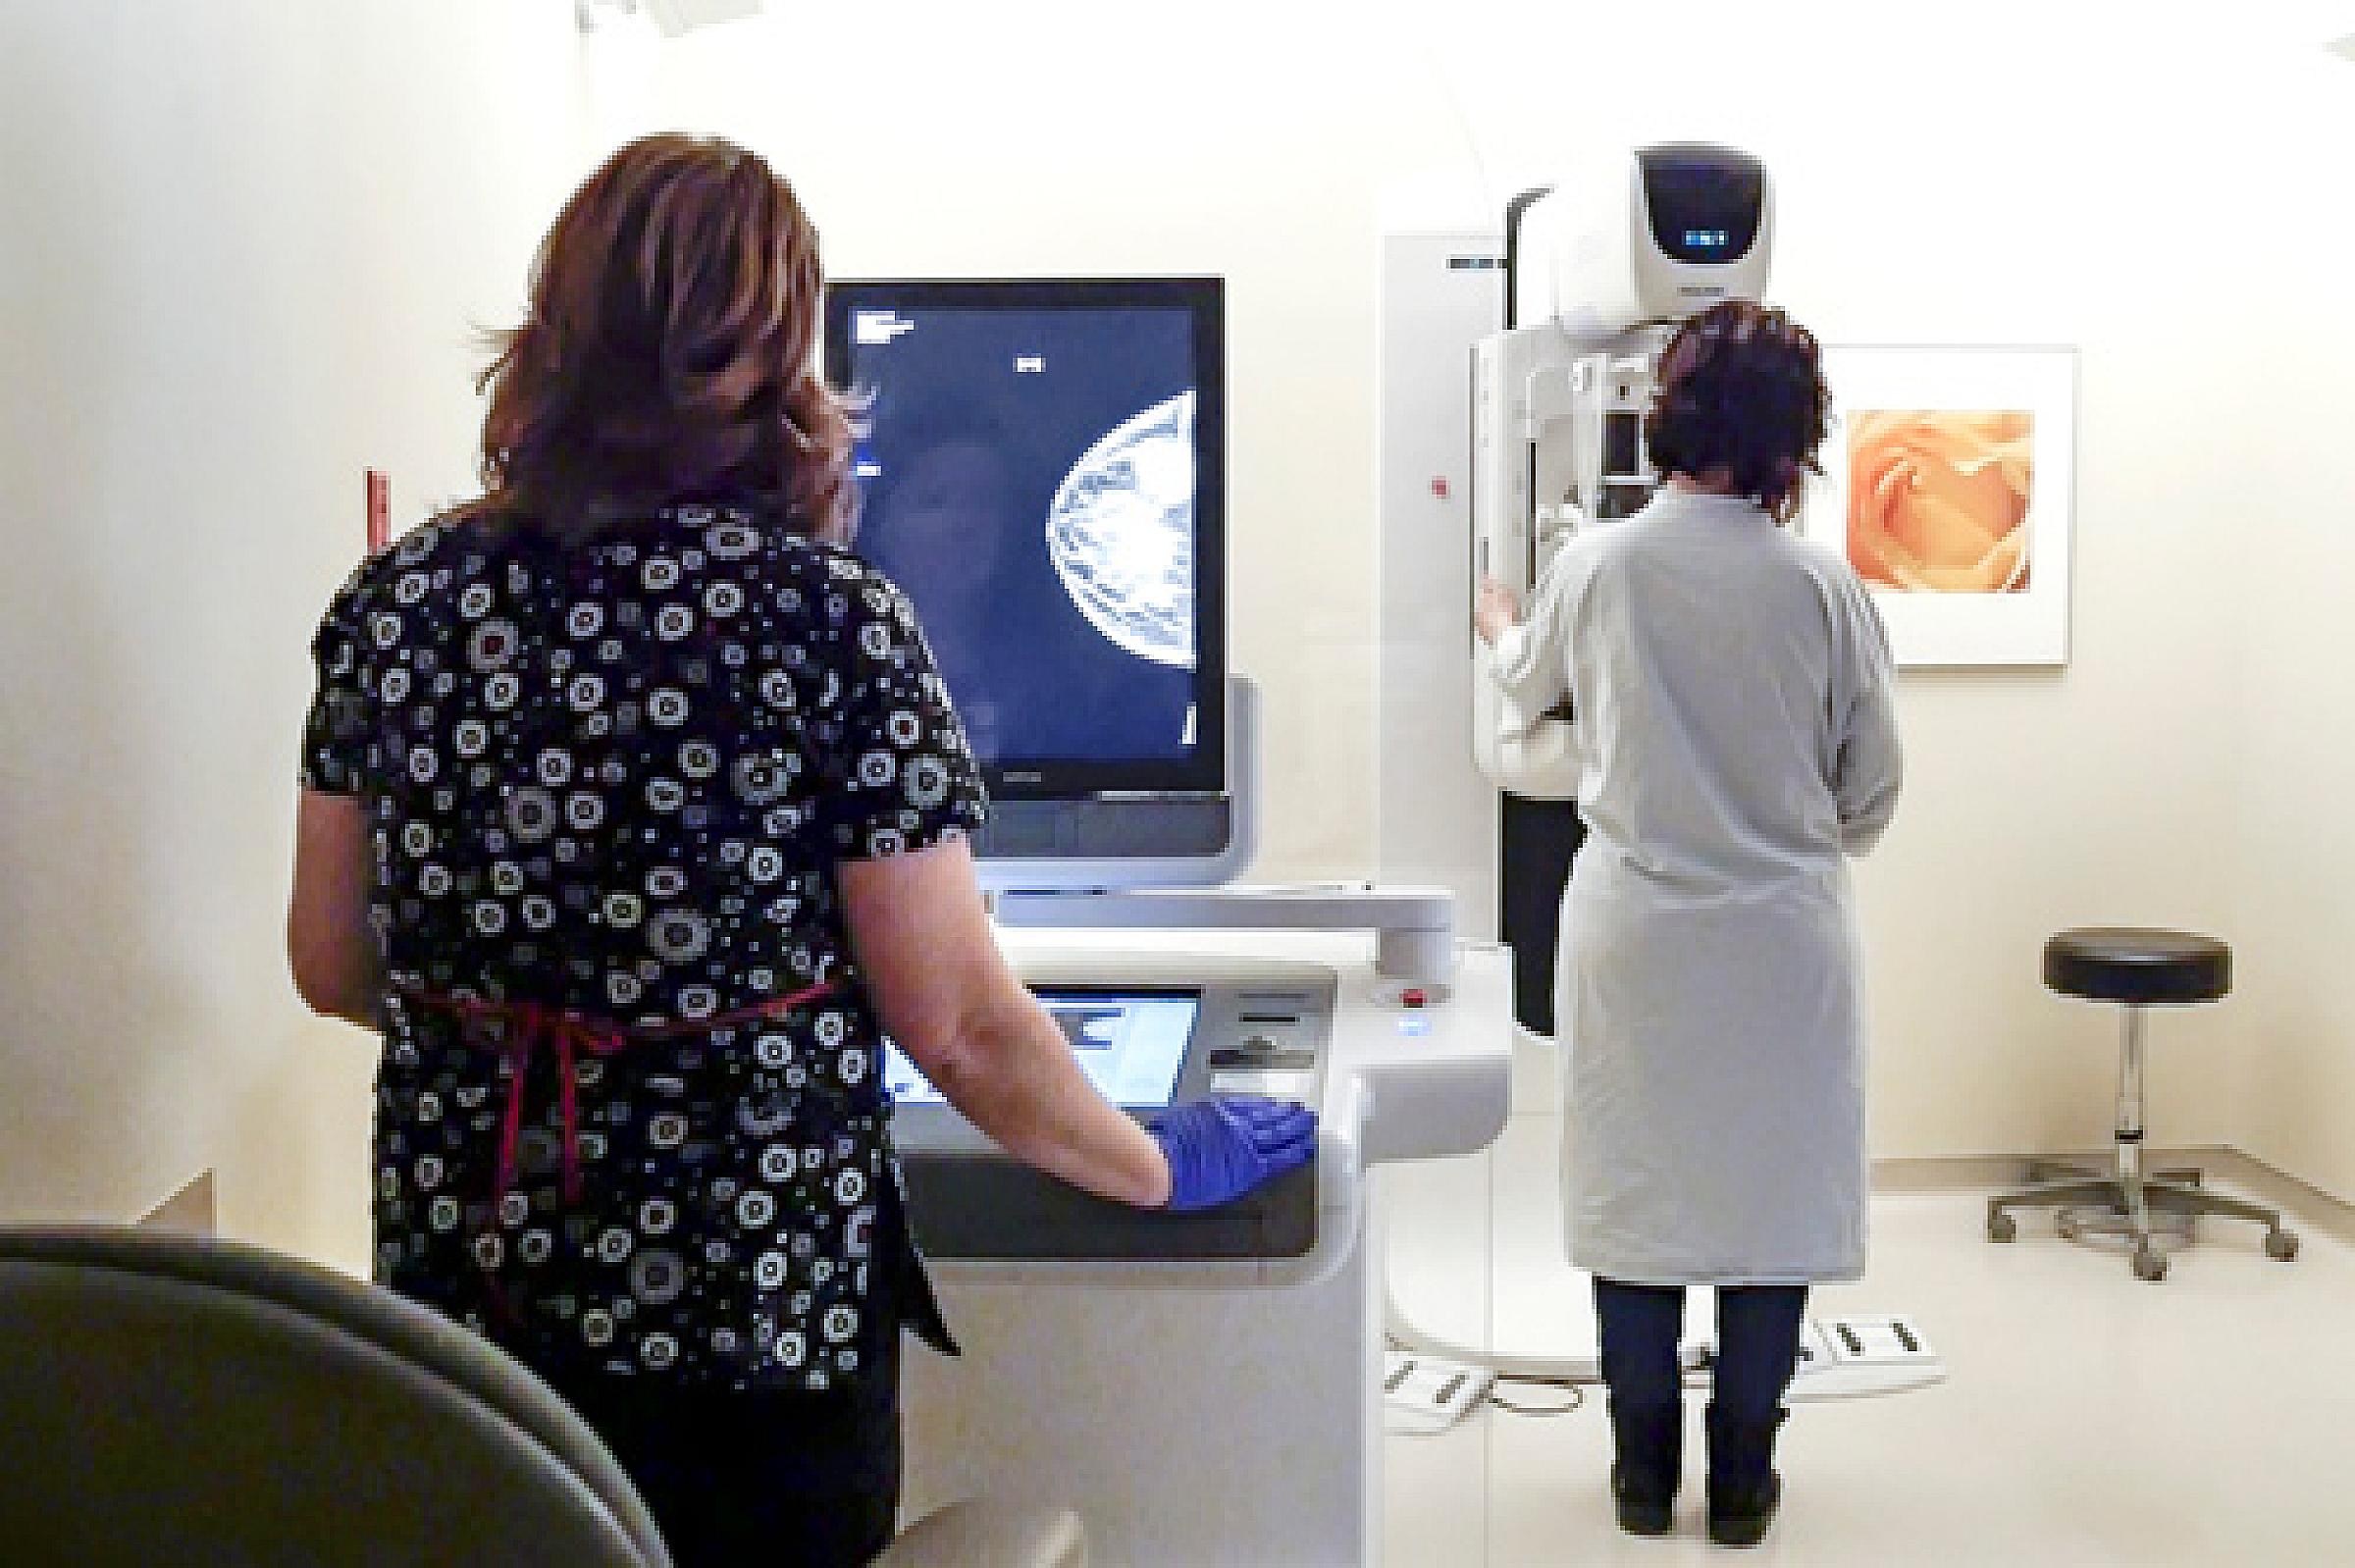 Mammogram scene with tech reviewing image and patient in the machine